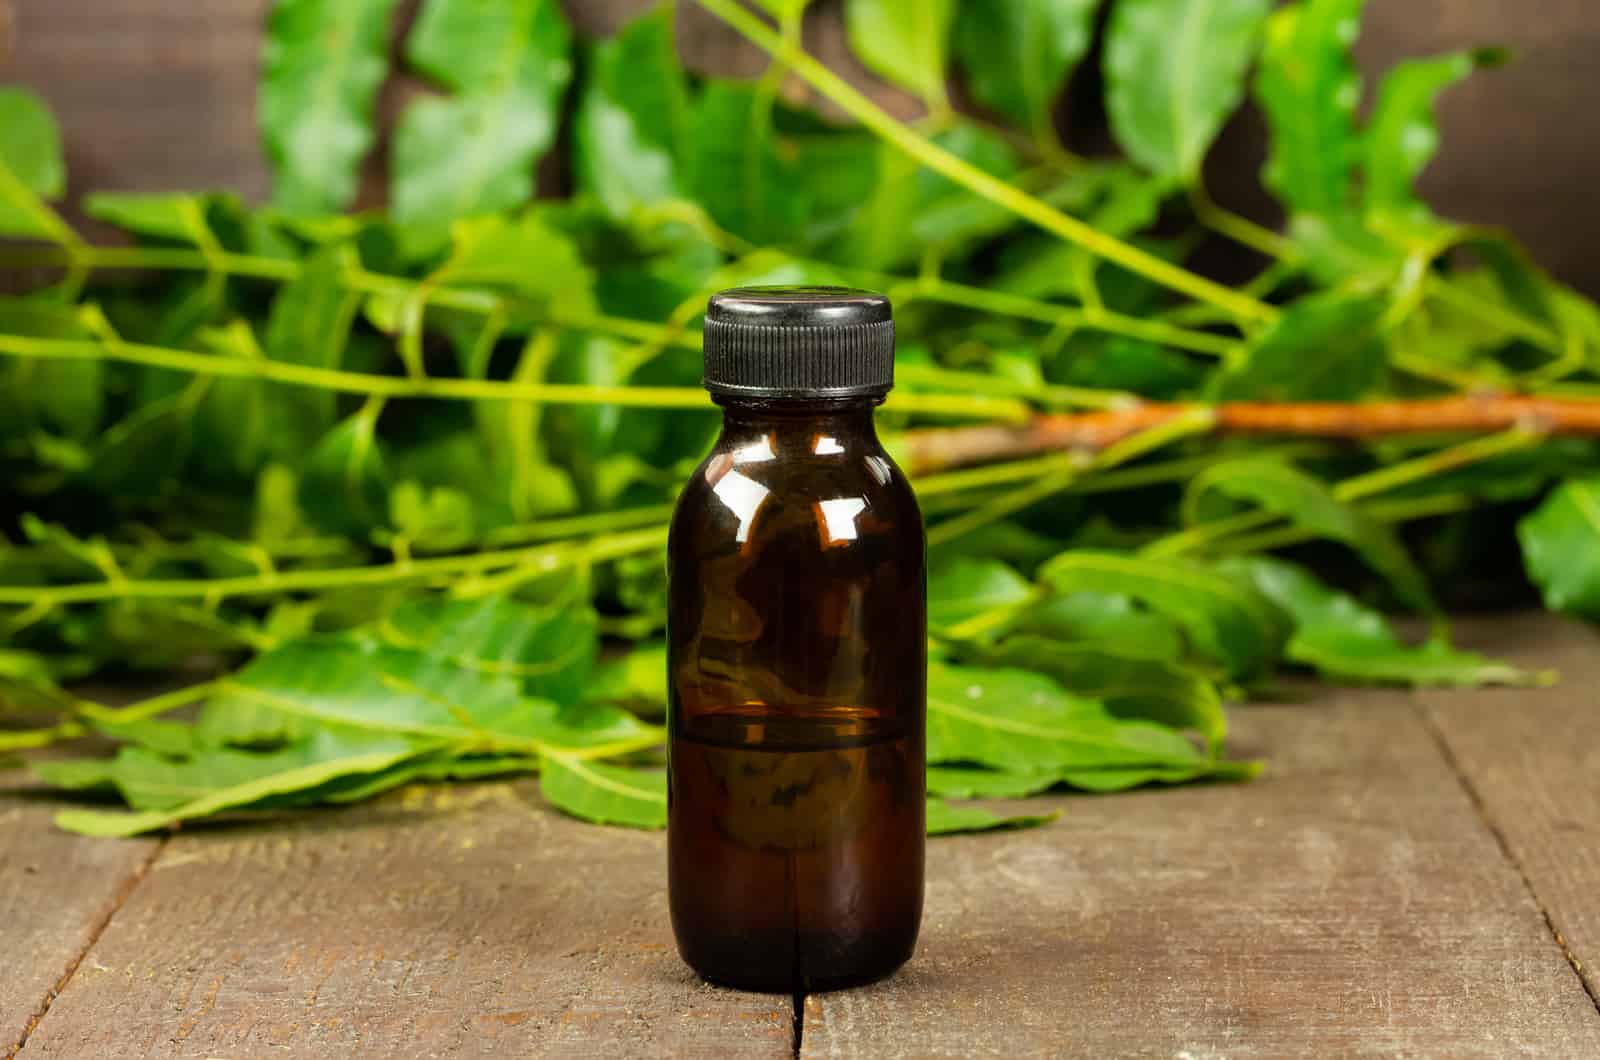 Neem Oil Burning Leaves: Why It Happens And How To Solve It